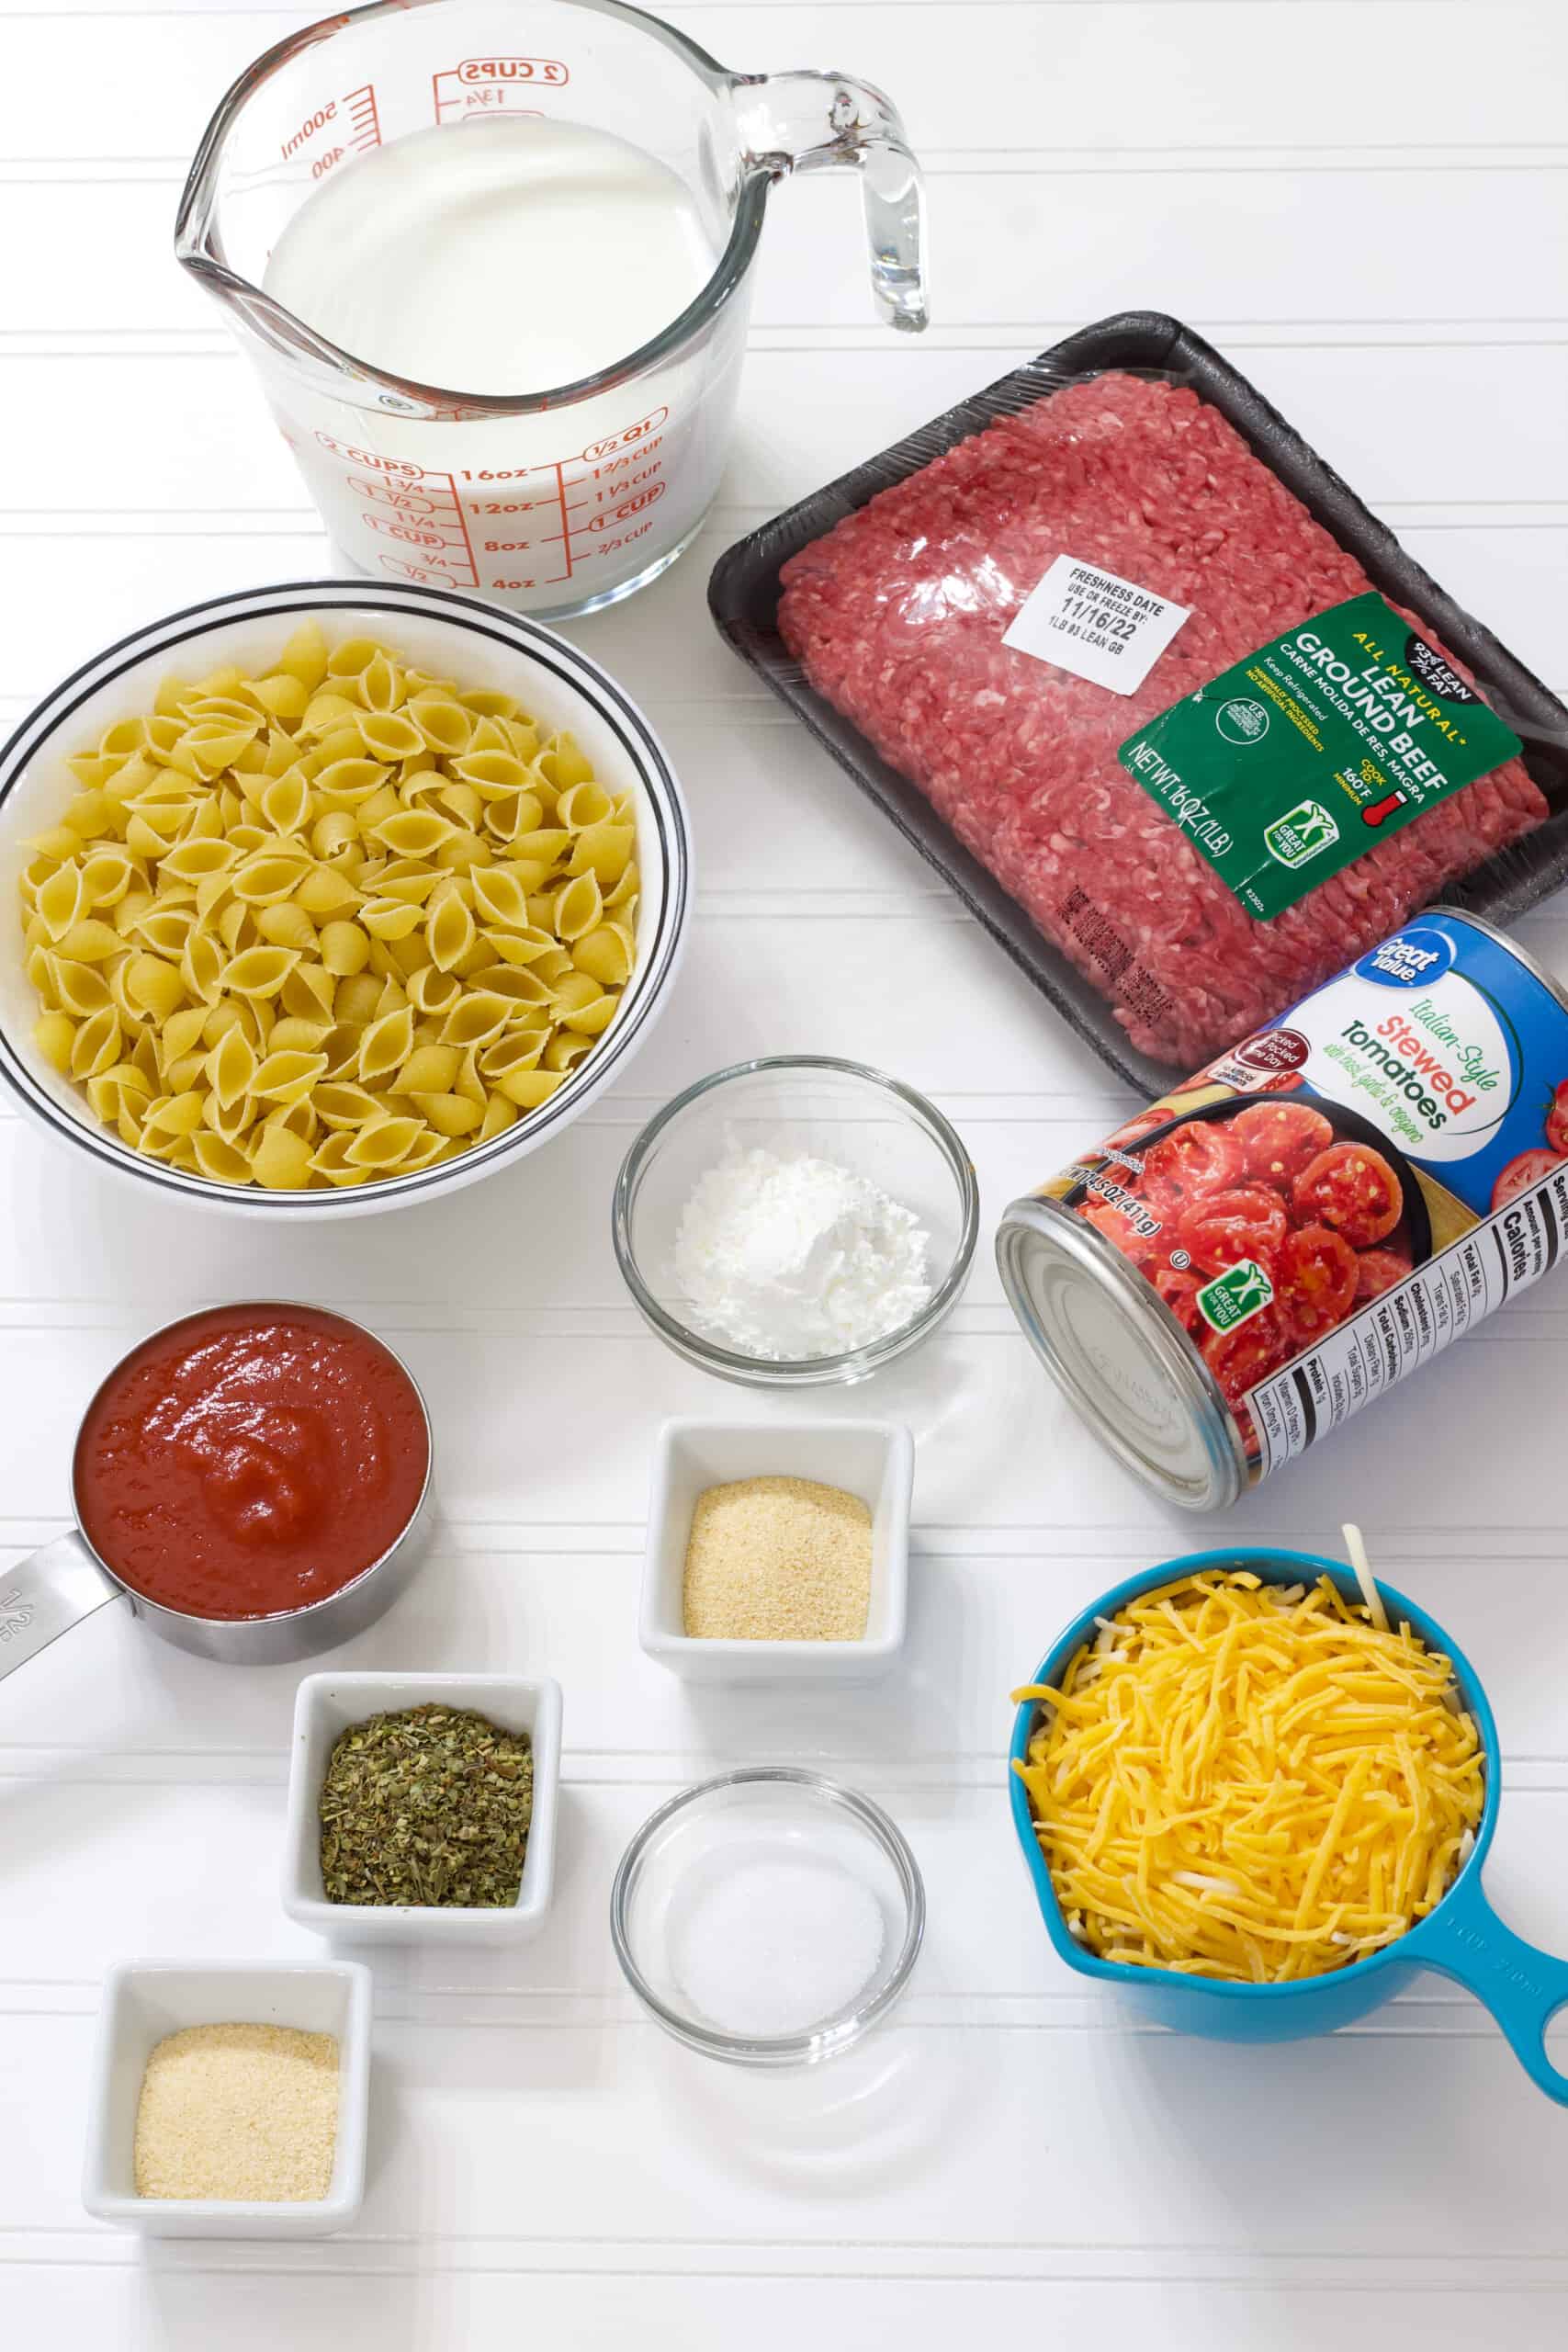 All of the ingredients needed to make the hamburger helper laid out on a table.